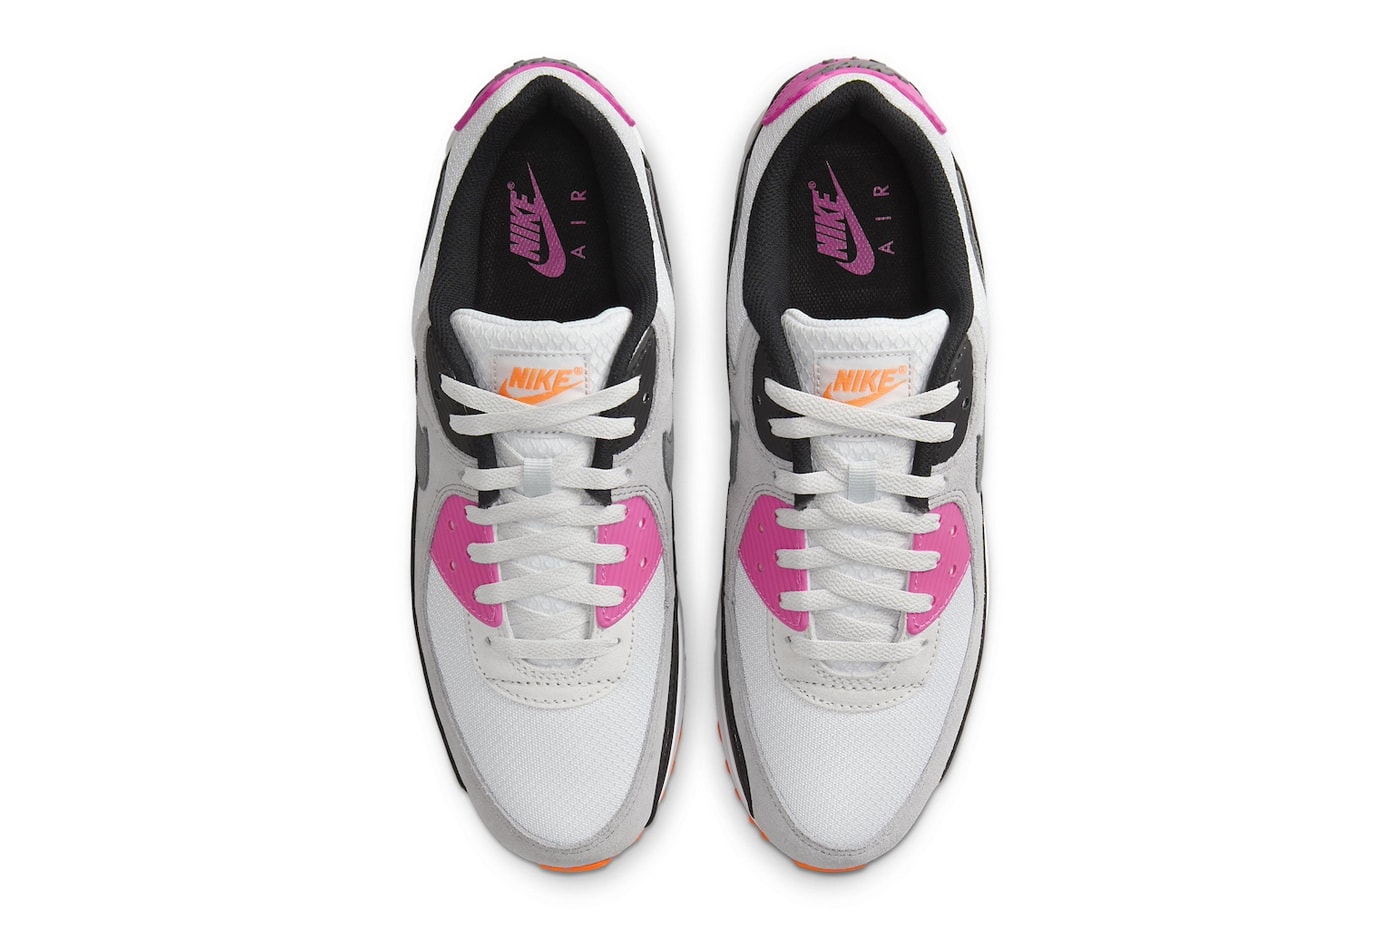 Nike Air Max 90 "Dunkin' Donuts" Has Surfaced Pure Platinum/Cool Grey-Alchemy Pink FN6958-003 ben affleck